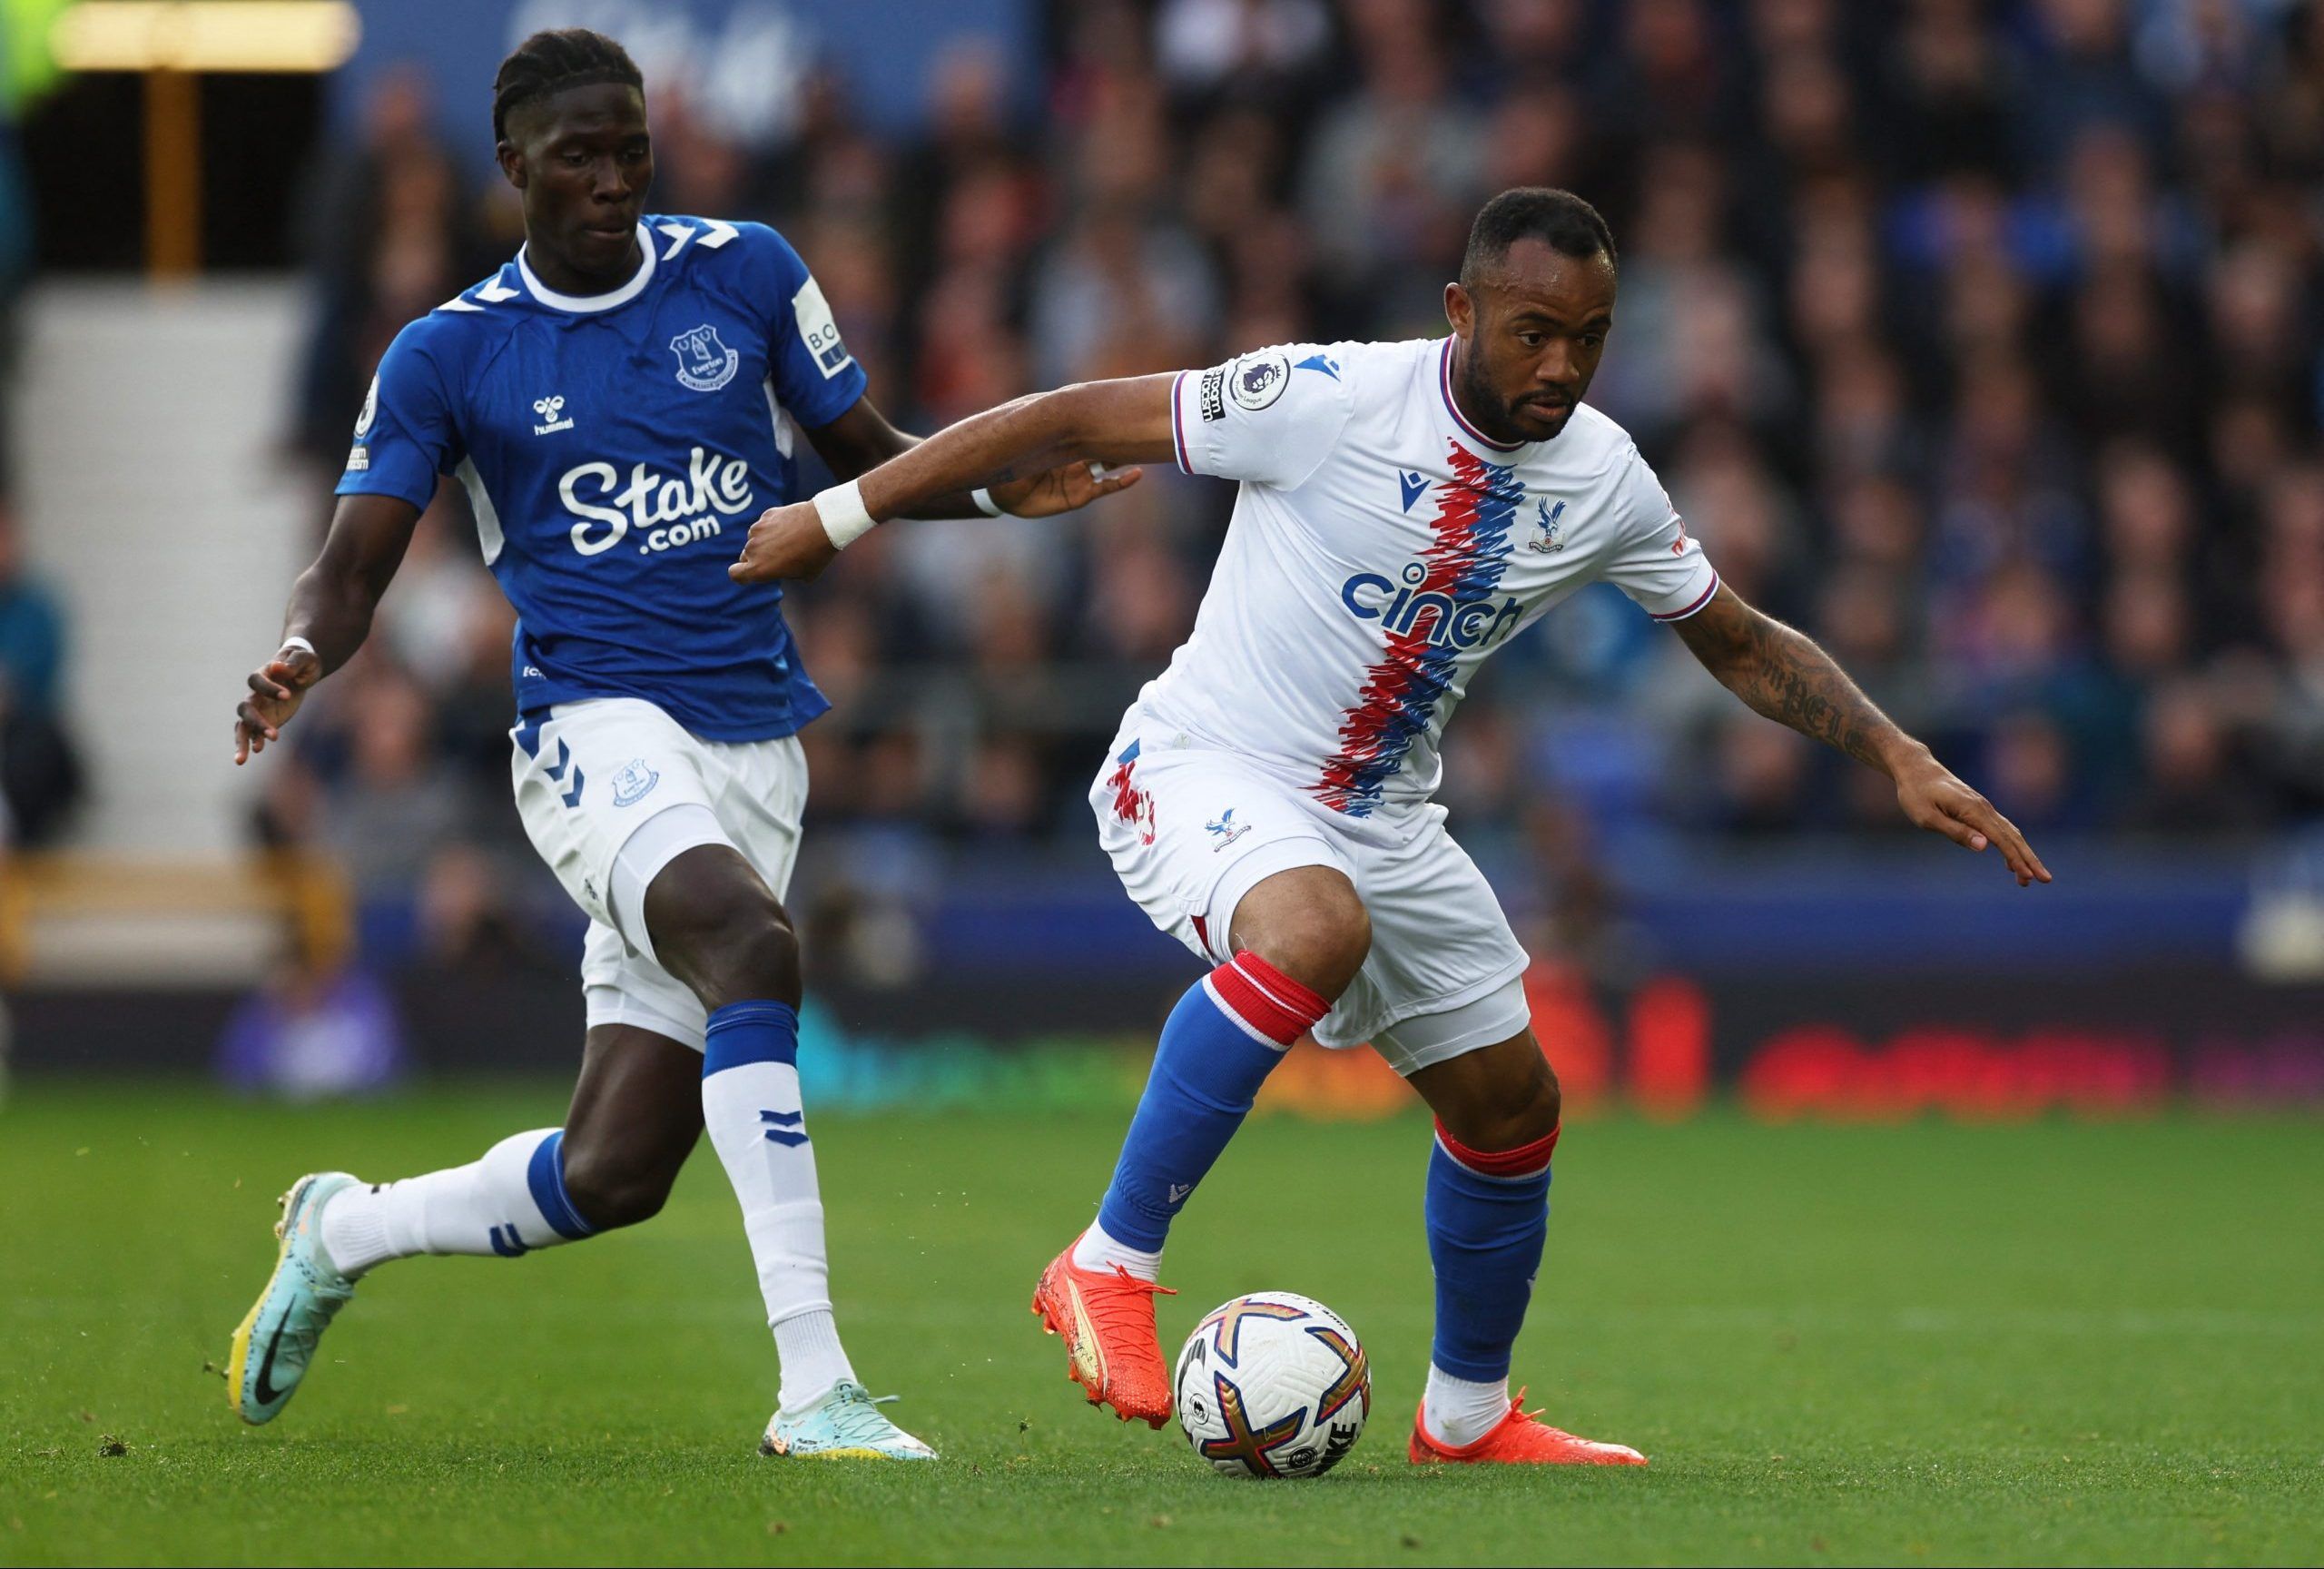 Soccer Football - Premier League - Everton v Crystal Palace - Goodison Park, Liverpool, Britain - October 22, 2022  Crystal Palace's Jordan Ayew in action with Everton's Amadou Onana Action Images via Reuters/Lee Smith EDITORIAL USE ONLY. No use with unauthorized audio, video, data, fixture lists, club/league logos or 'live' services. Online in-match use limited to 75 images, no video emulation. No use in betting, games or single club /league/player publications.  Please contact your account rep